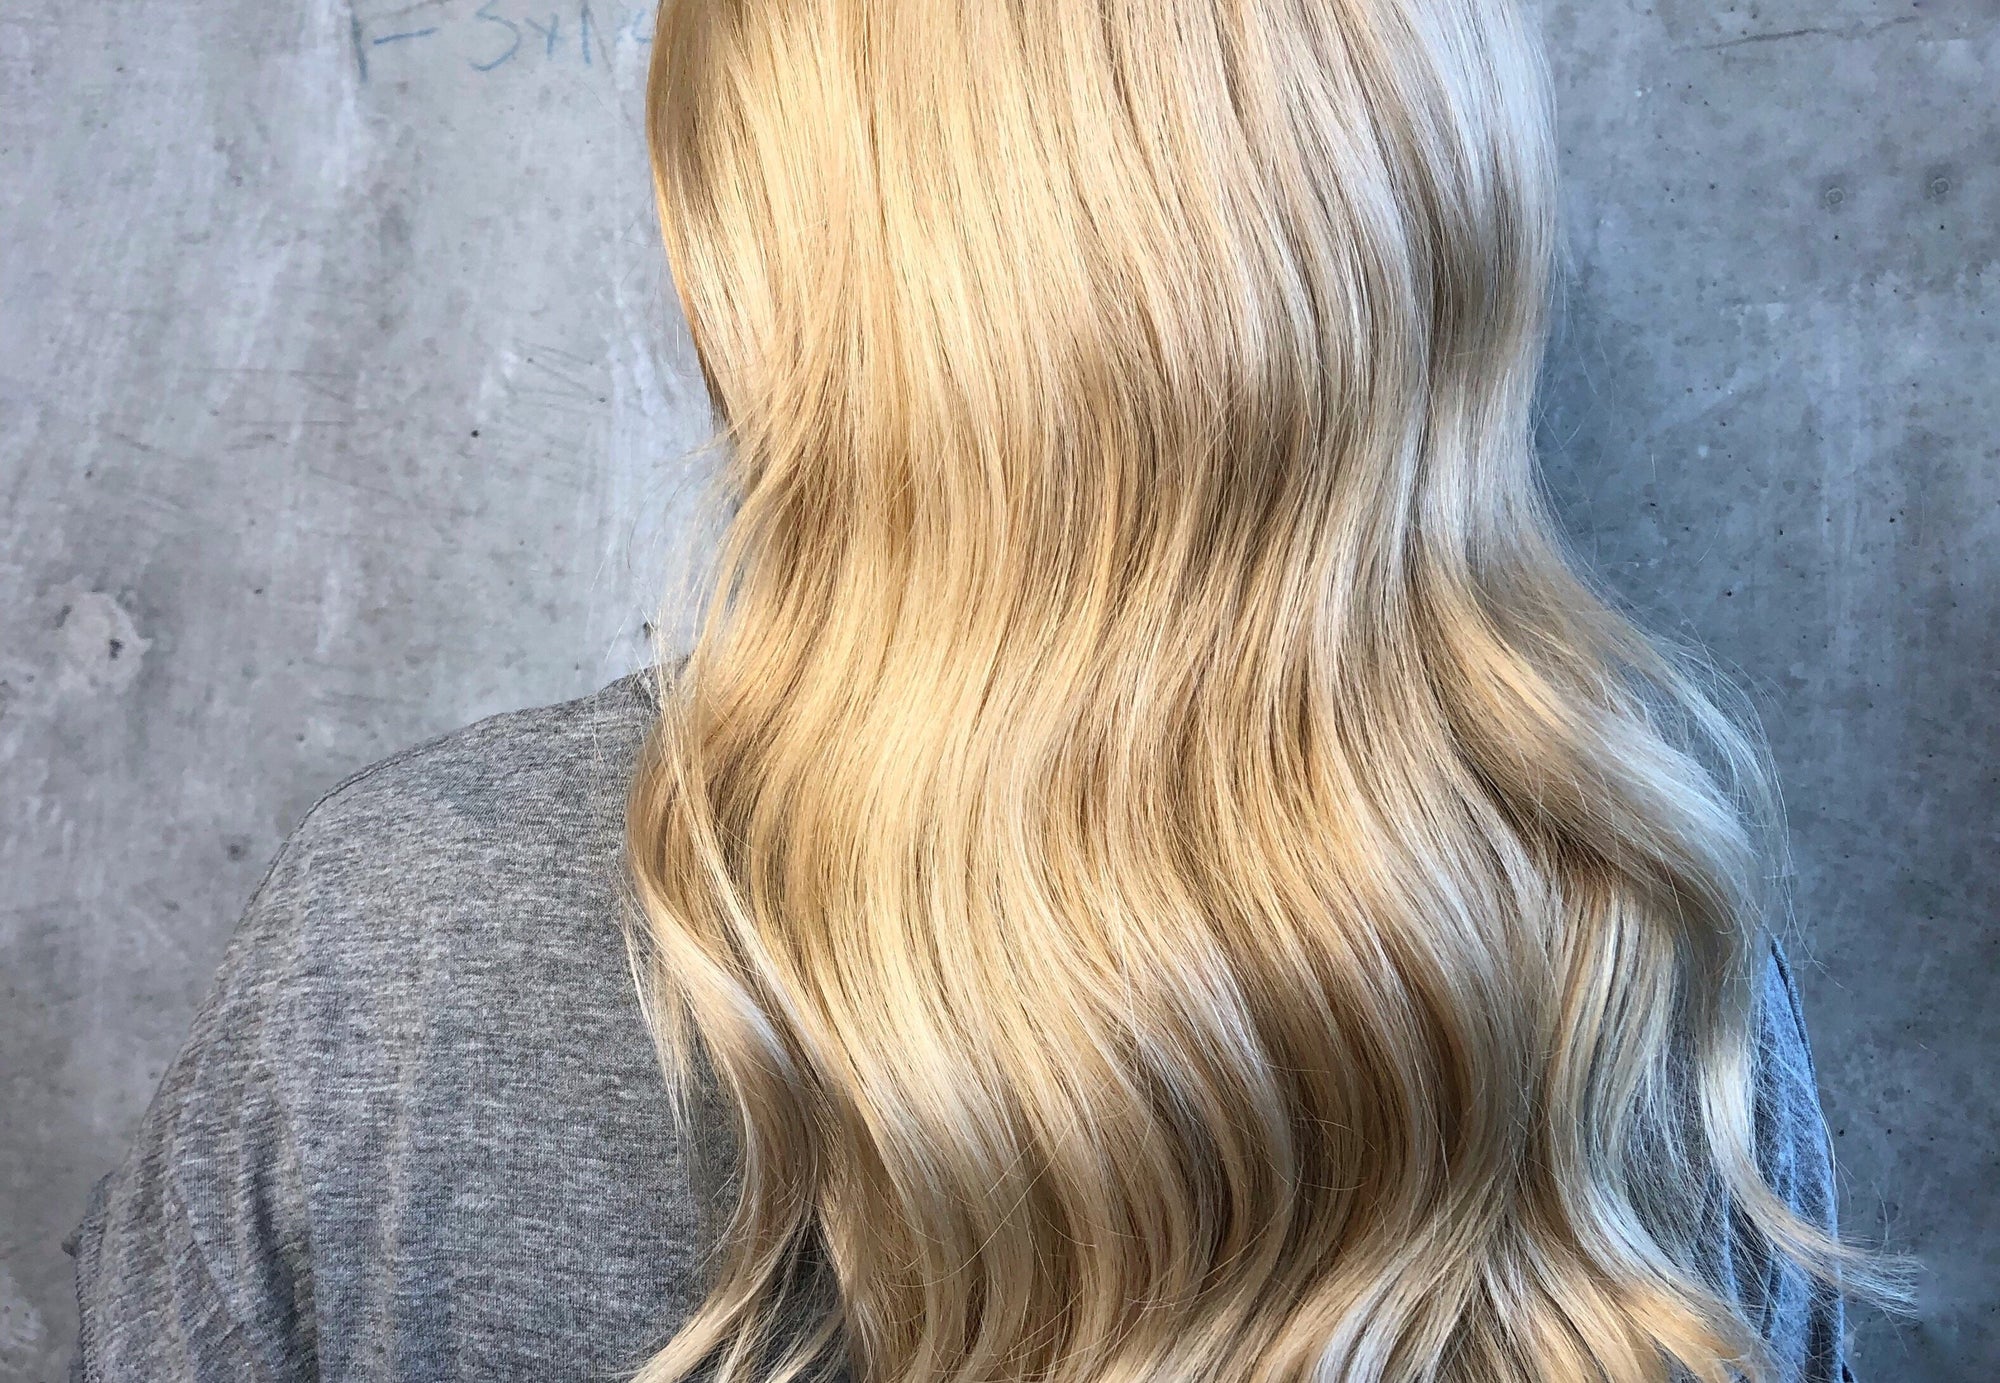 Tips for shiny healthy hair from Davines stylists